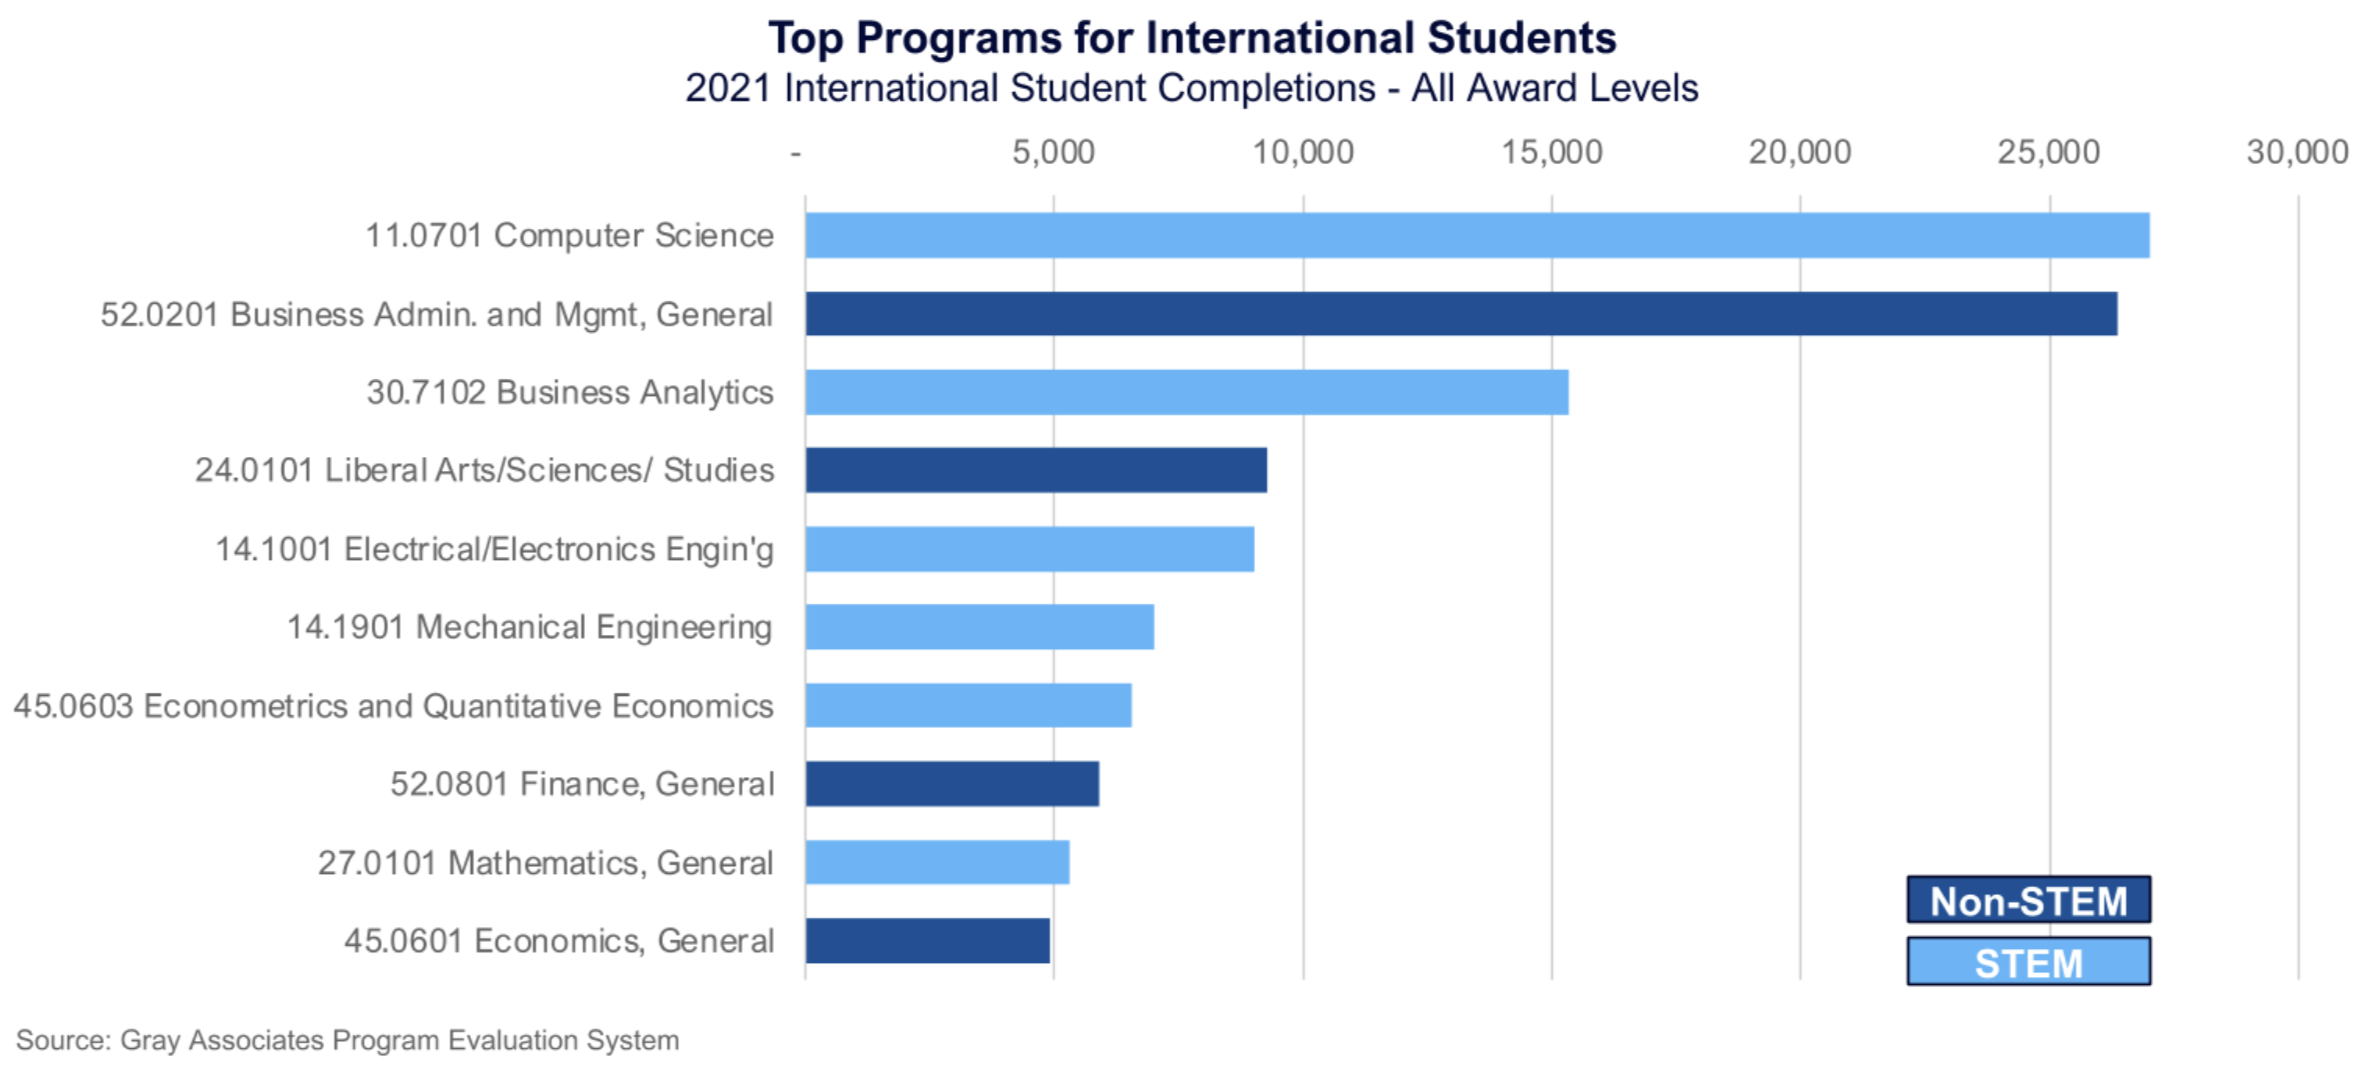 Top Programs for International Students (2021 International Student Completions - All Award Levels)